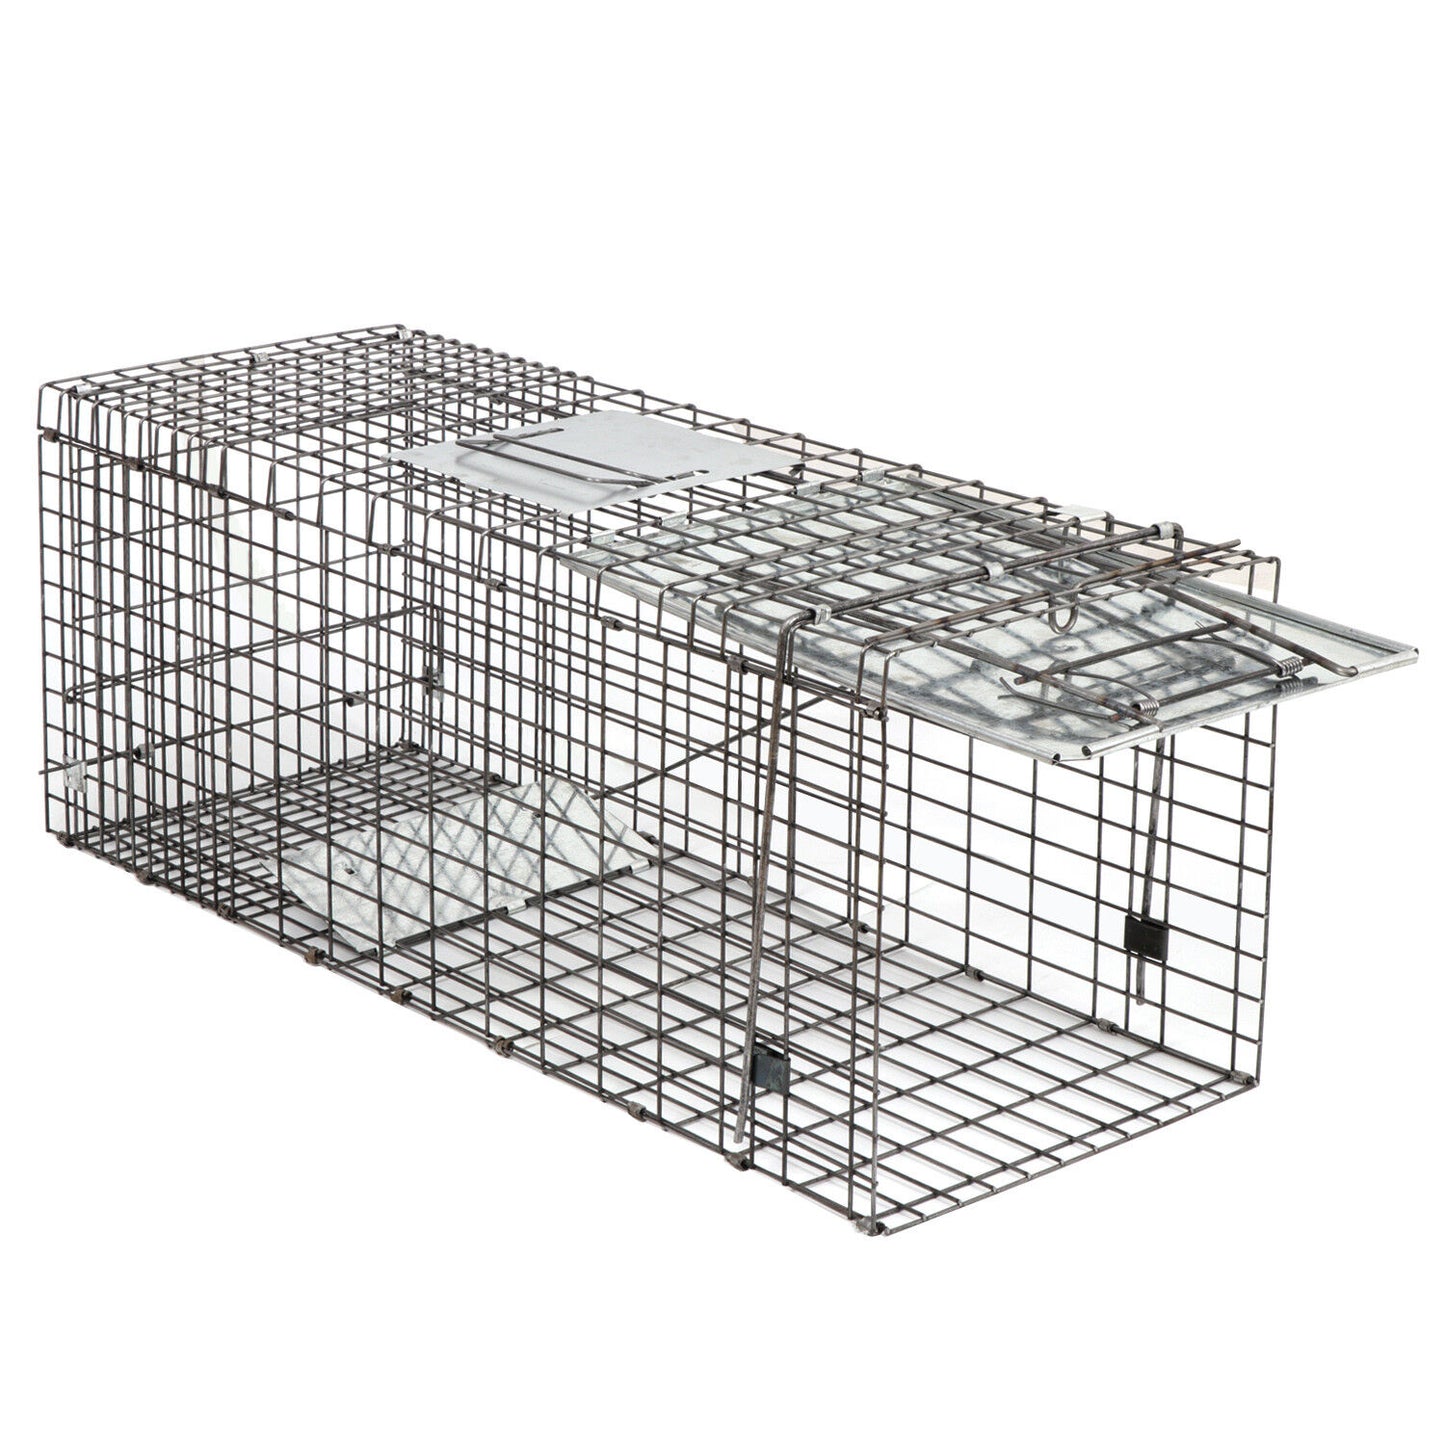 32" Humane Animal Trap Steel Cage for Live Rodent Control Rat Squirrel Raccon